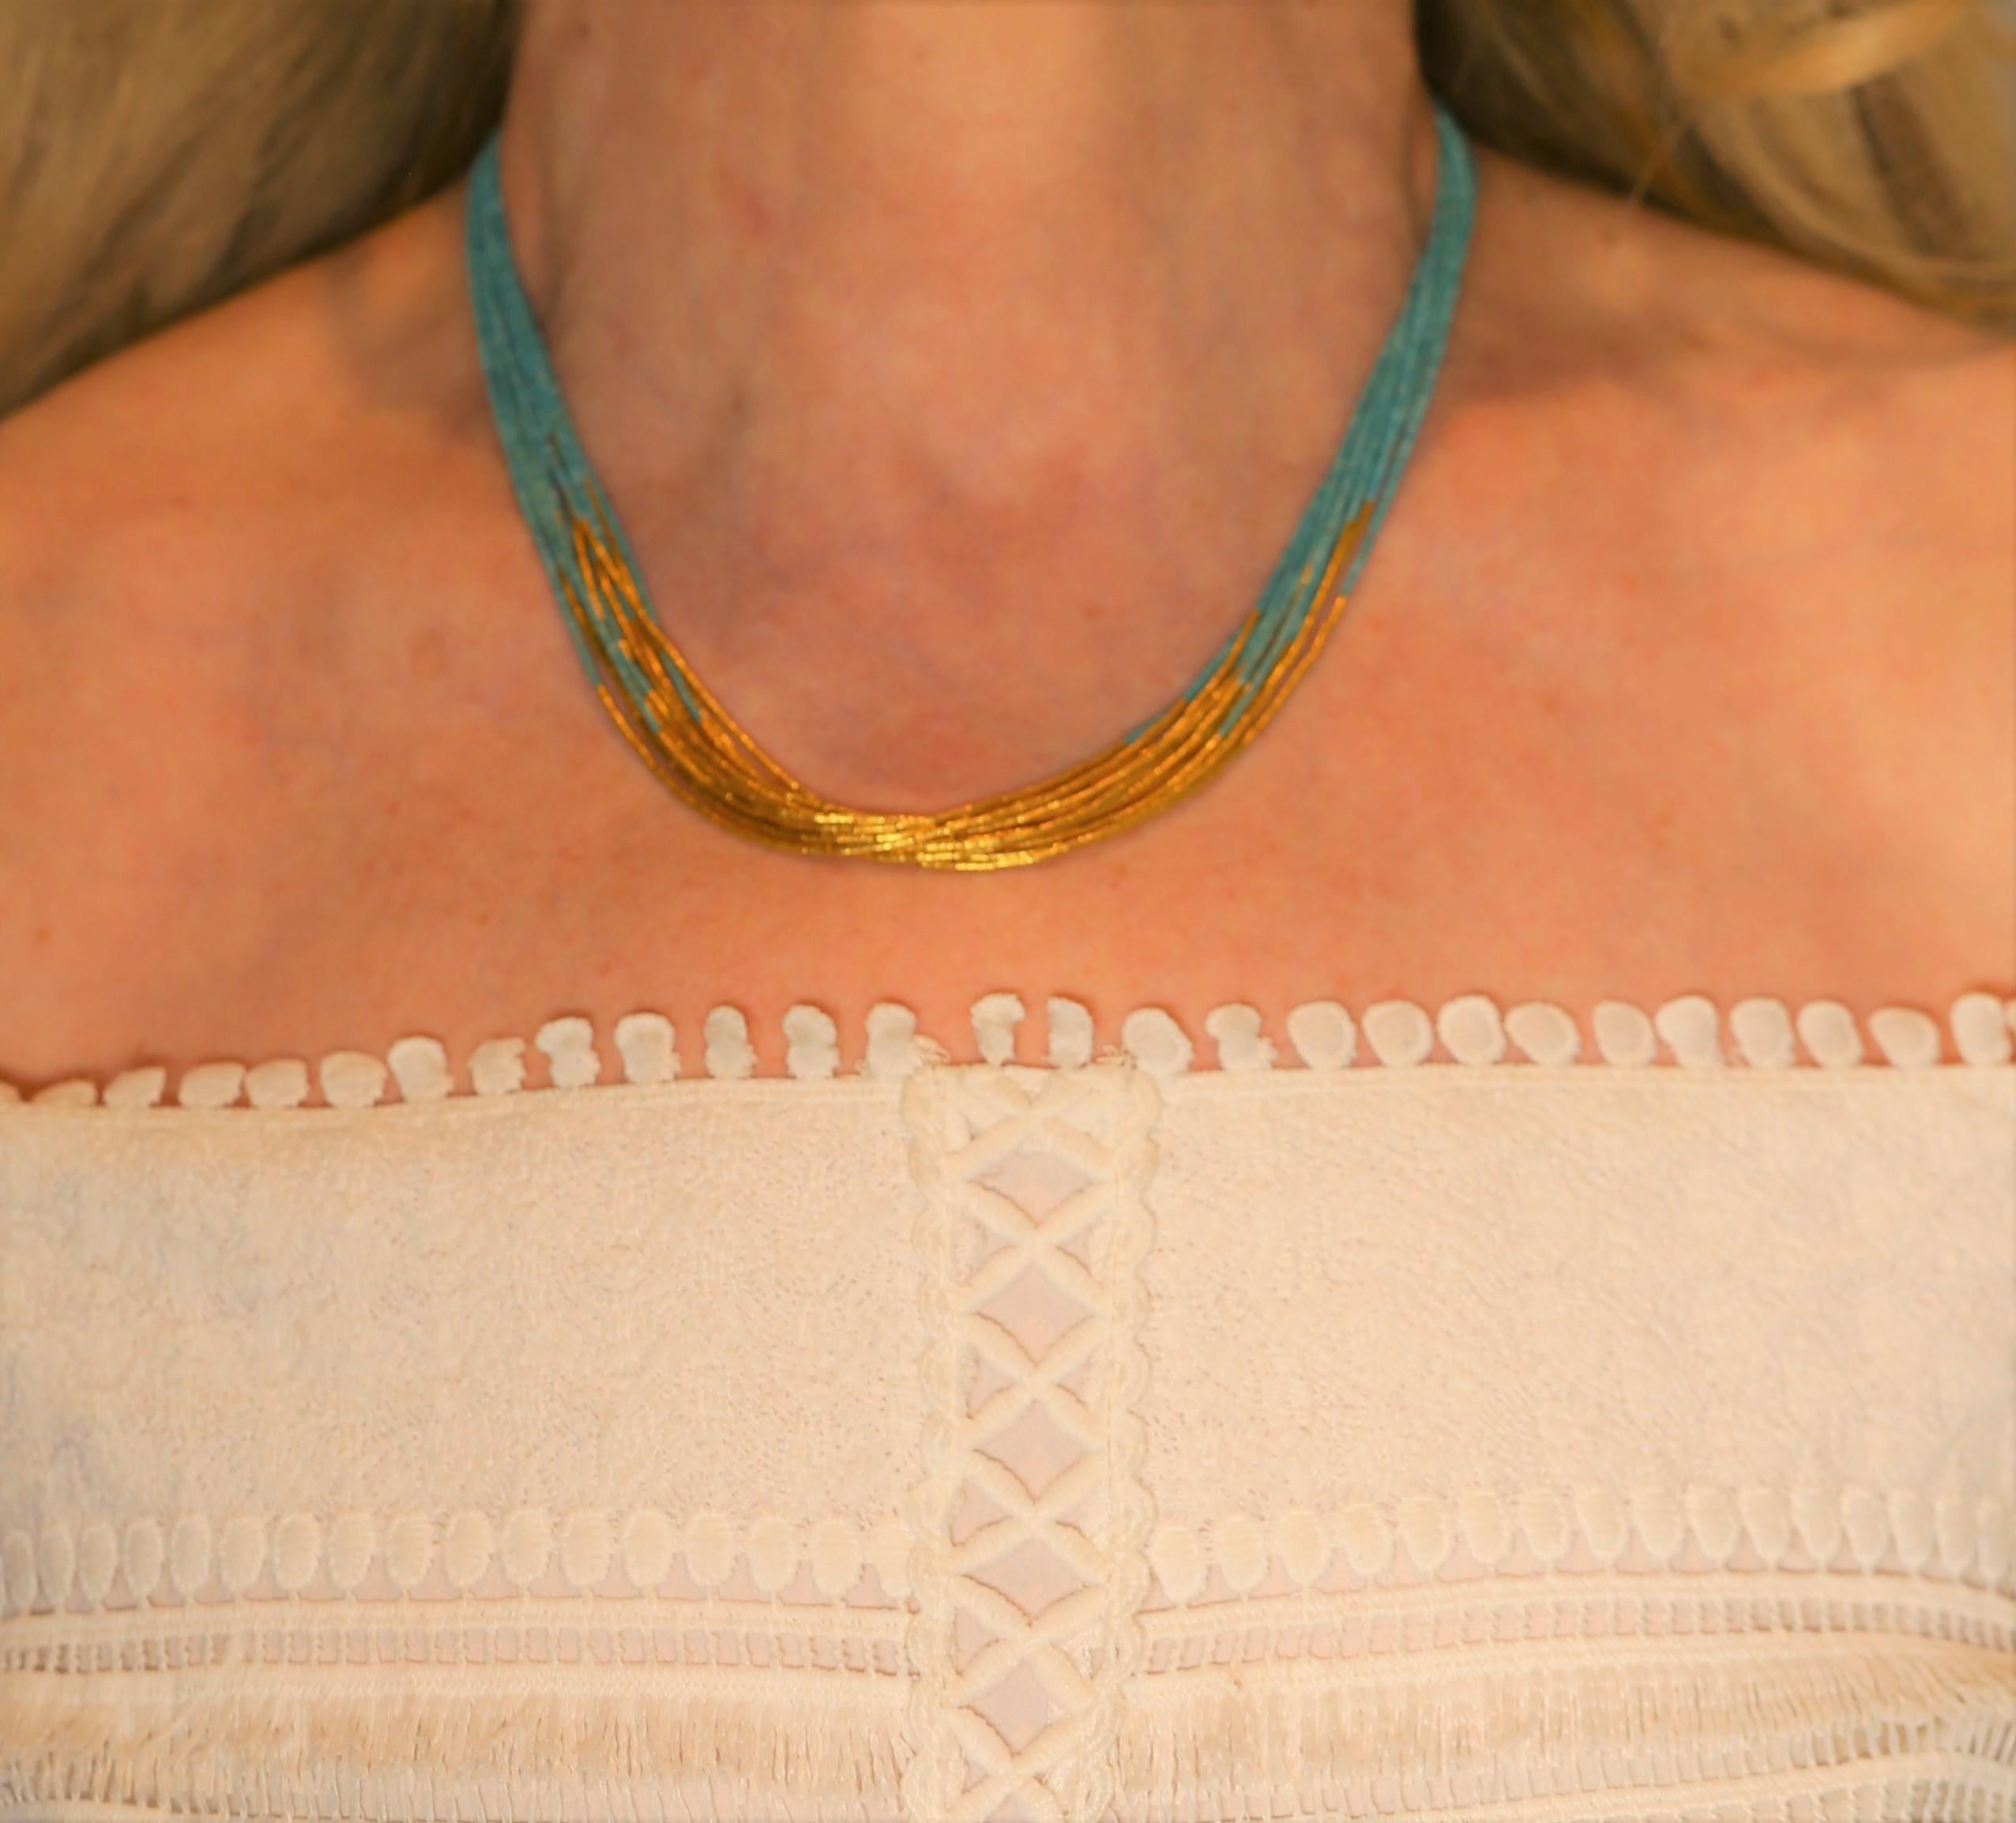 This twelve strand natural Afghan turquoise necklace features a eye catching 24 karat yellow gold 